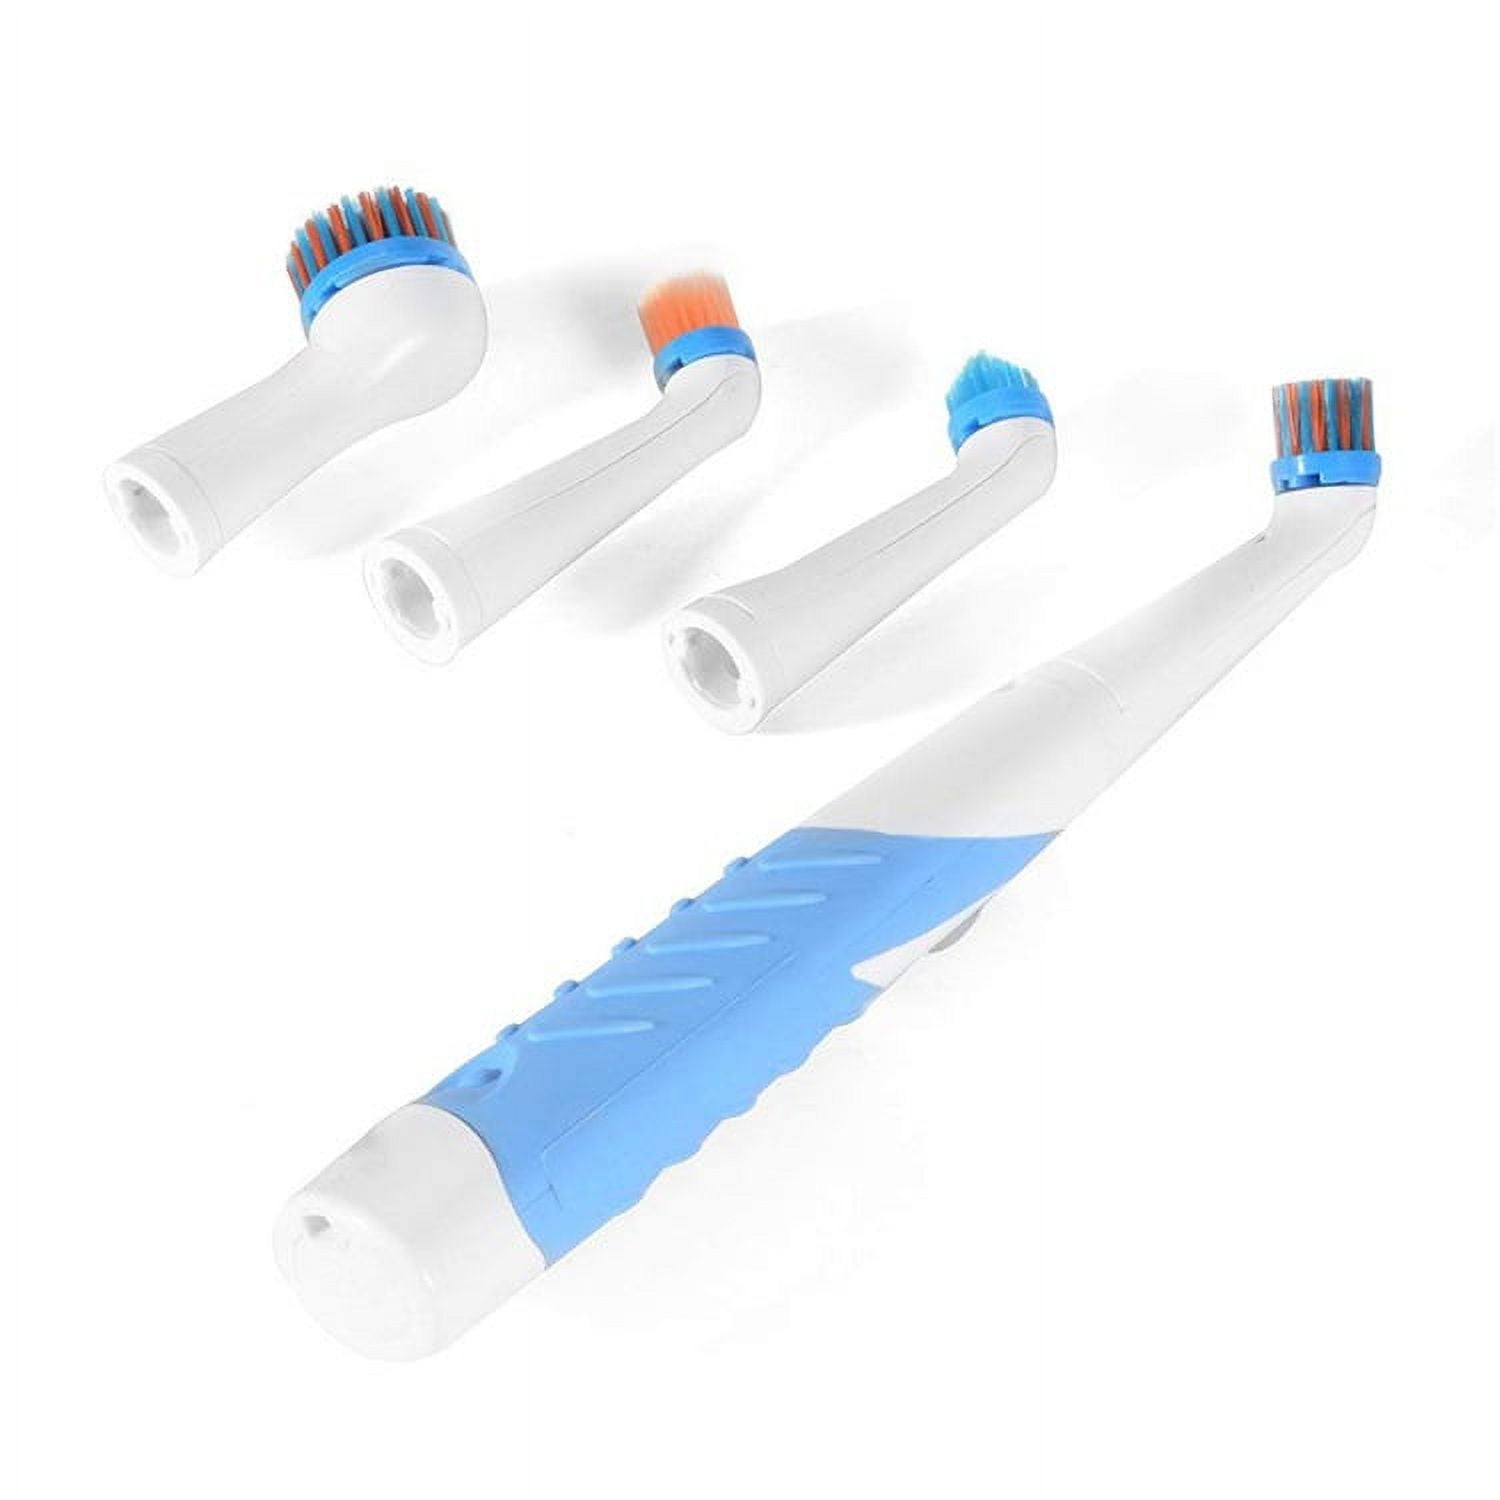 4in1 Electric Sonic Scrubber Cleaning Brush Household Bathroom Kitchen Brush  US